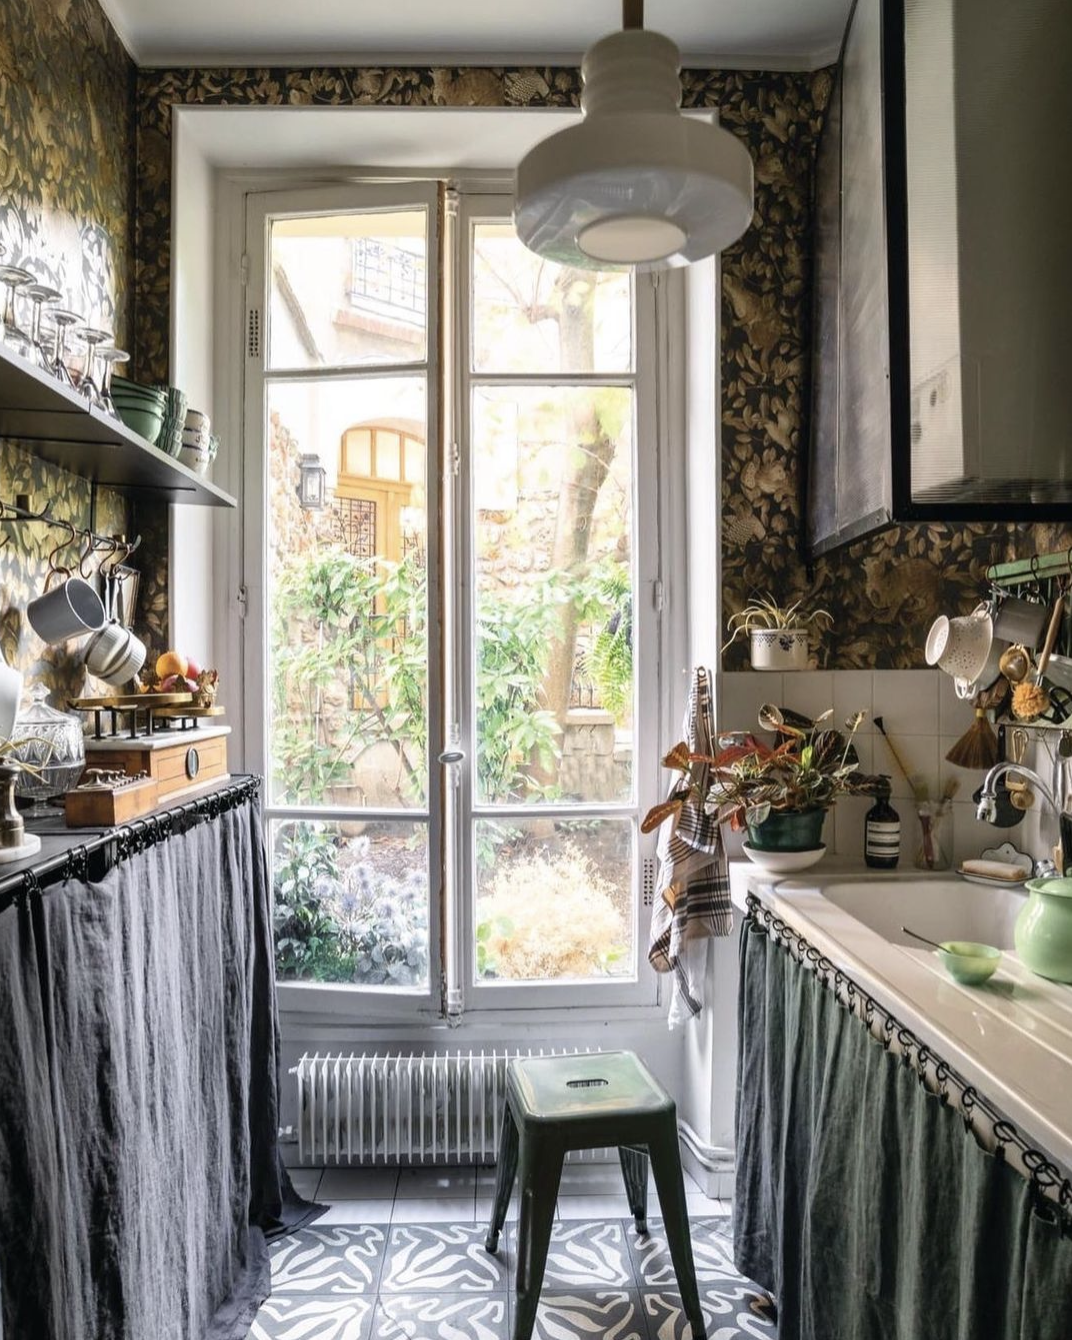 Curtains Instead Of Cabinets For A Country House feel